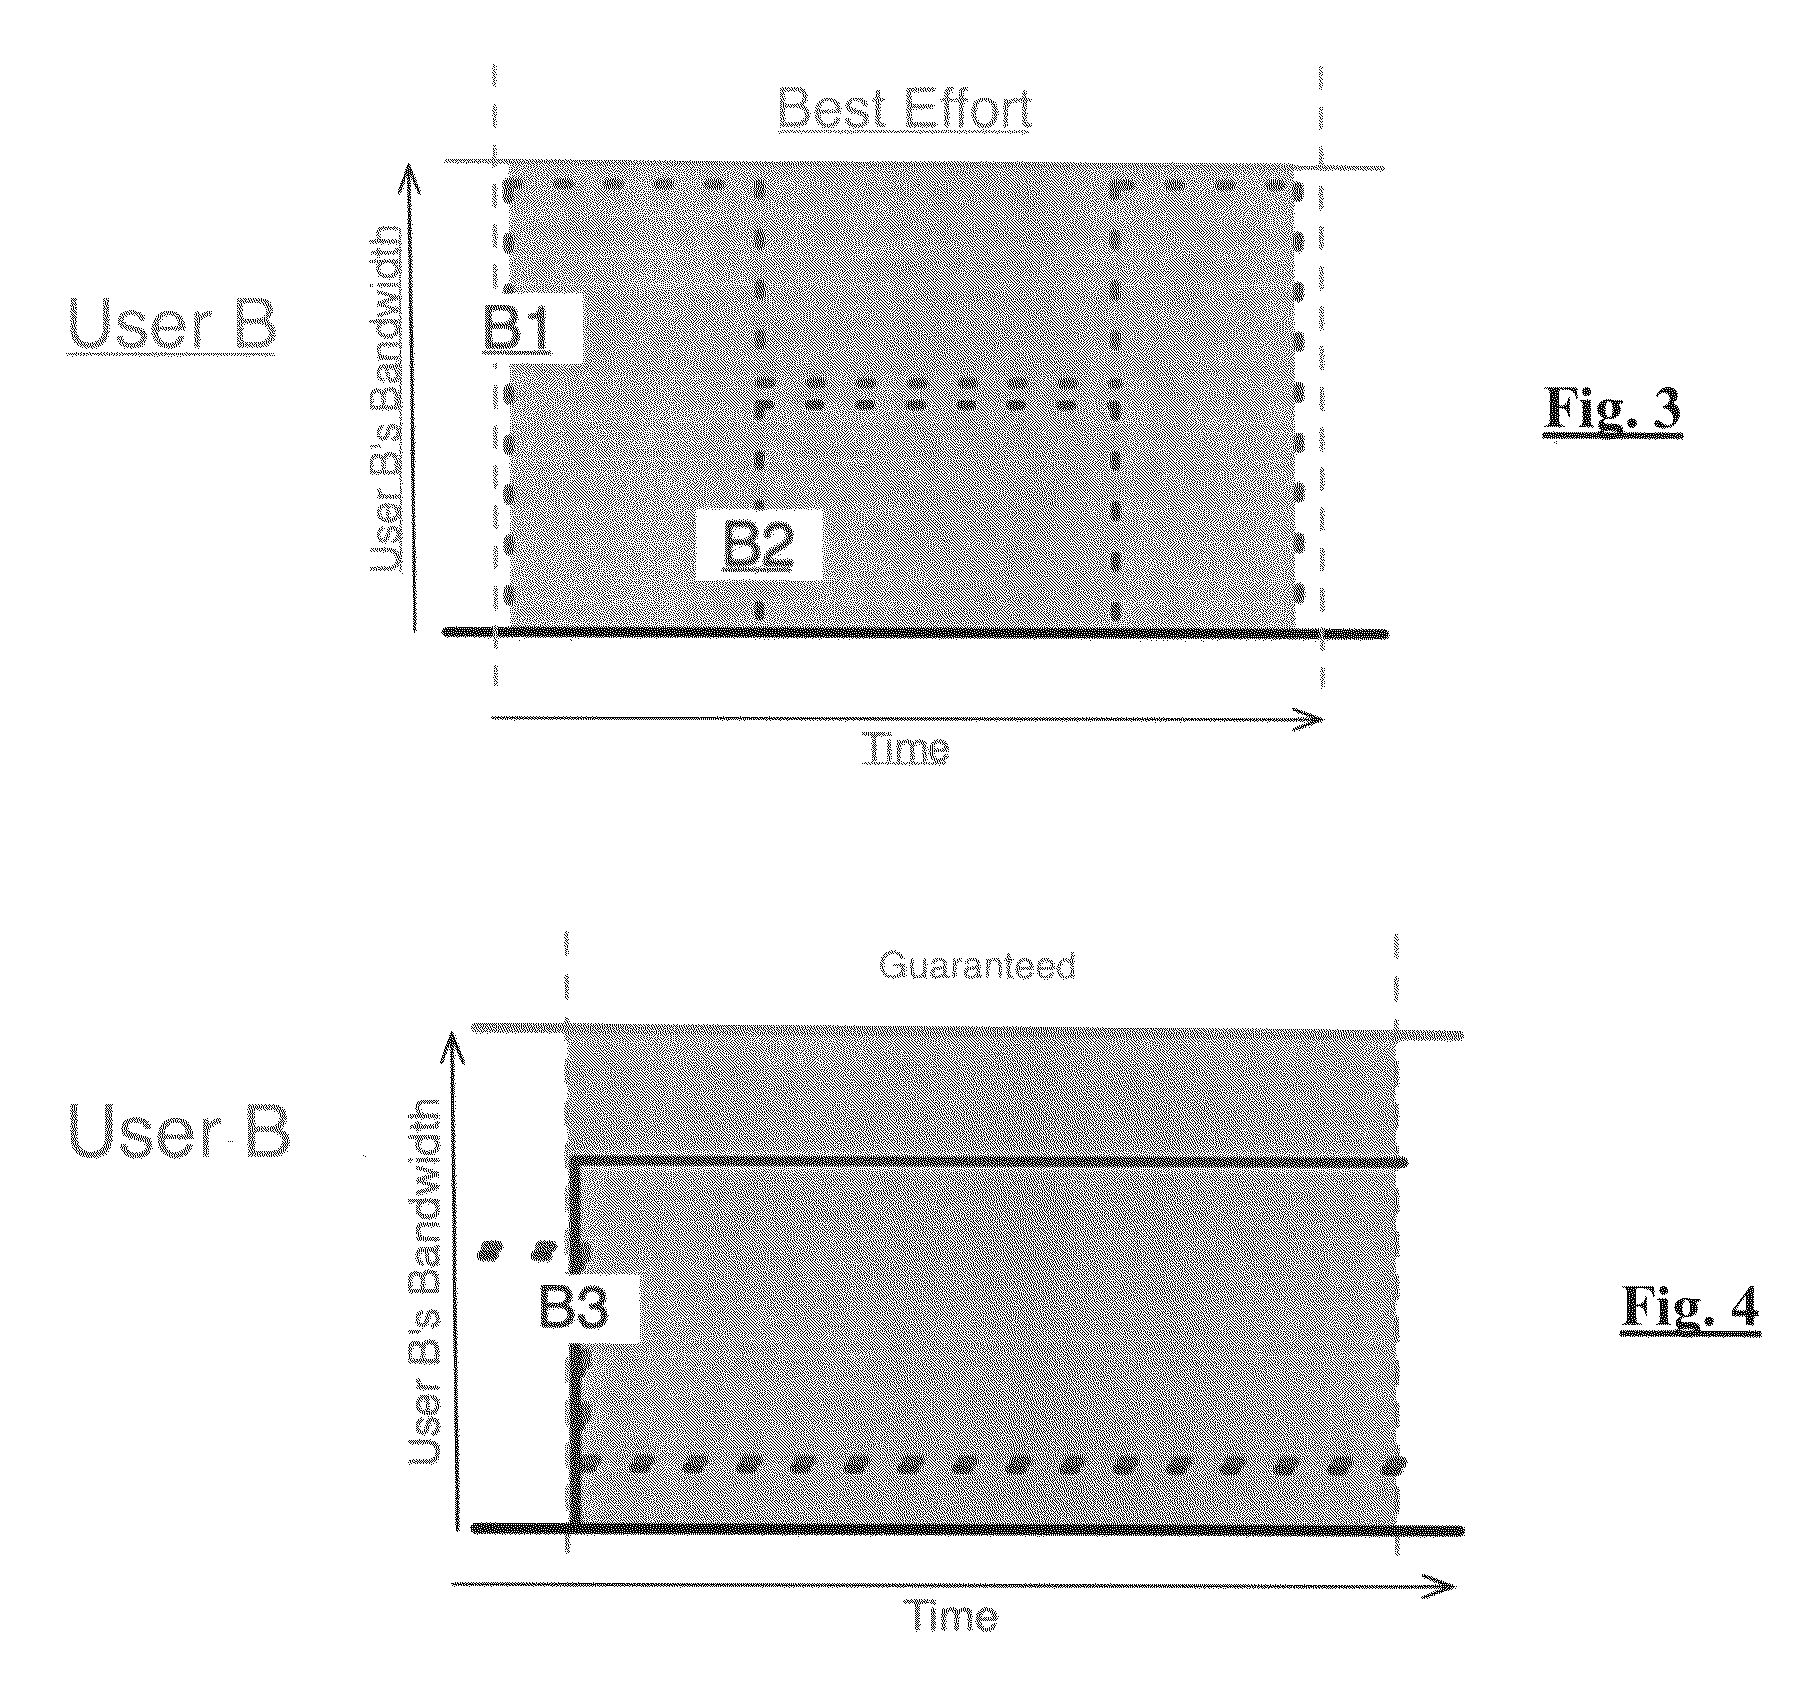 Practical model for high speed file delivery services supporting guaranteed delivery times and differentiated service levels